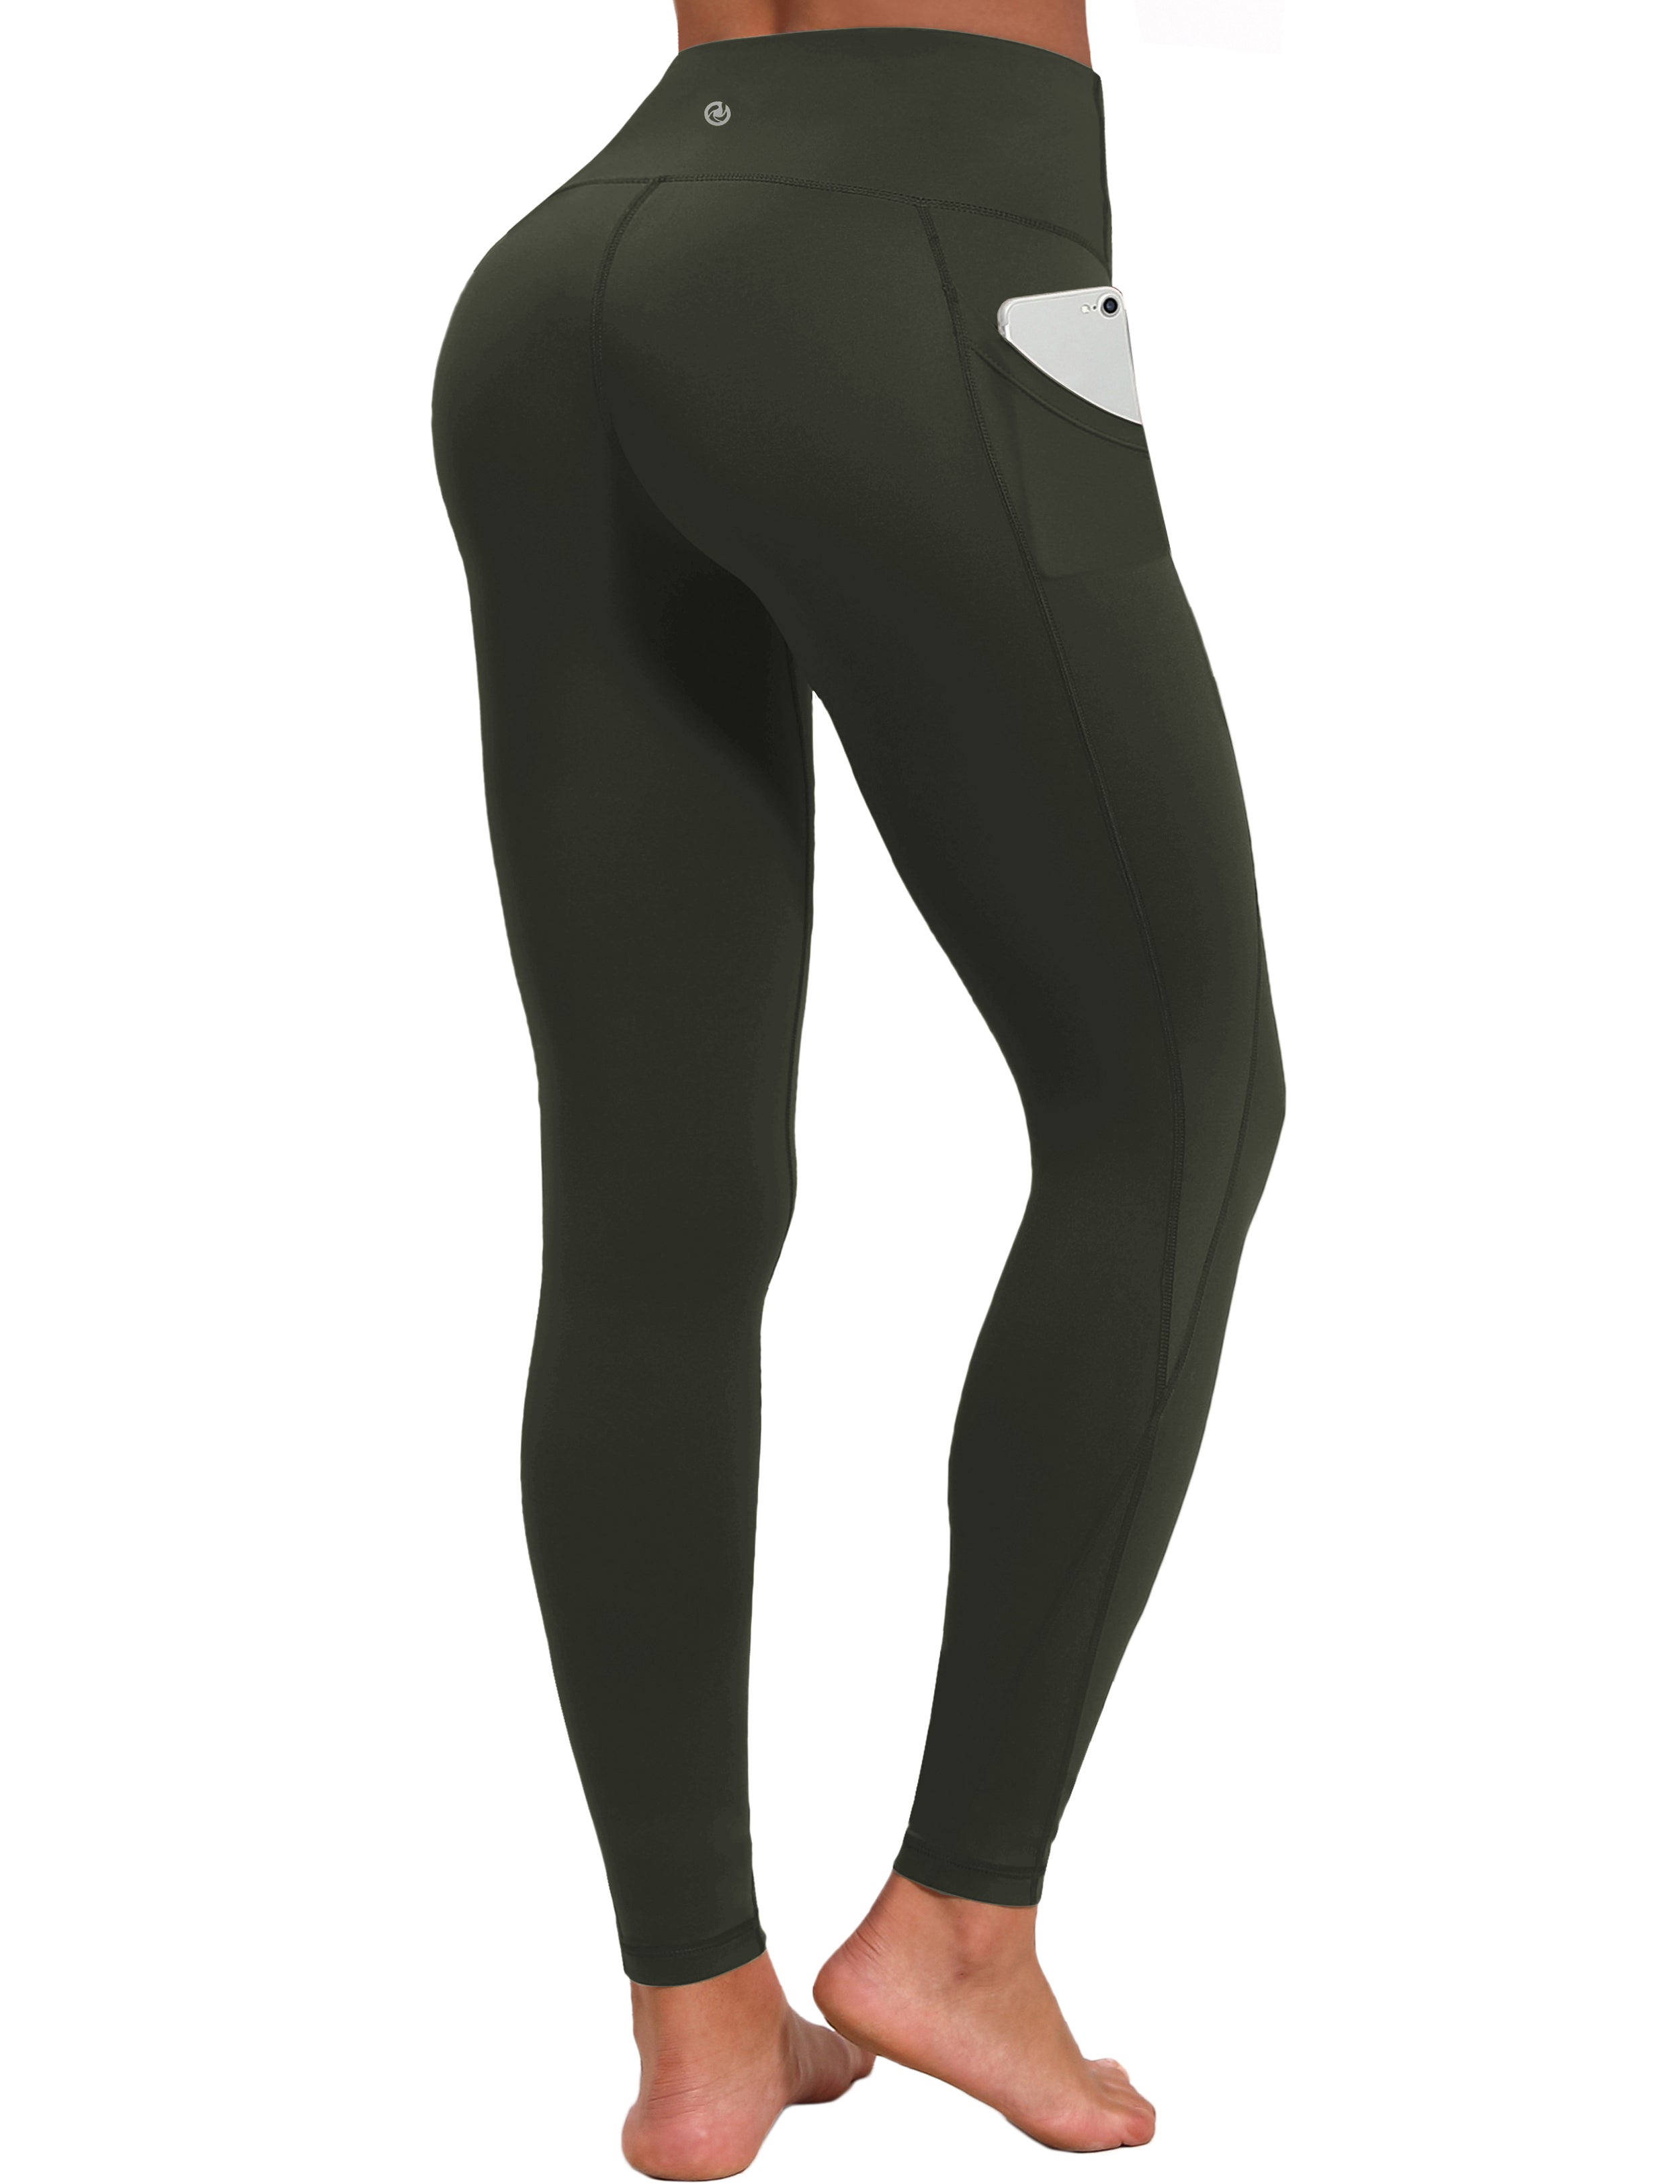 High Waist Side Pockets yogastudio Pants olivegray 75% Nylon, 25% Spandex Fabric doesn't attract lint easily 4-way stretch No see-through Moisture-wicking Tummy control Inner pocket